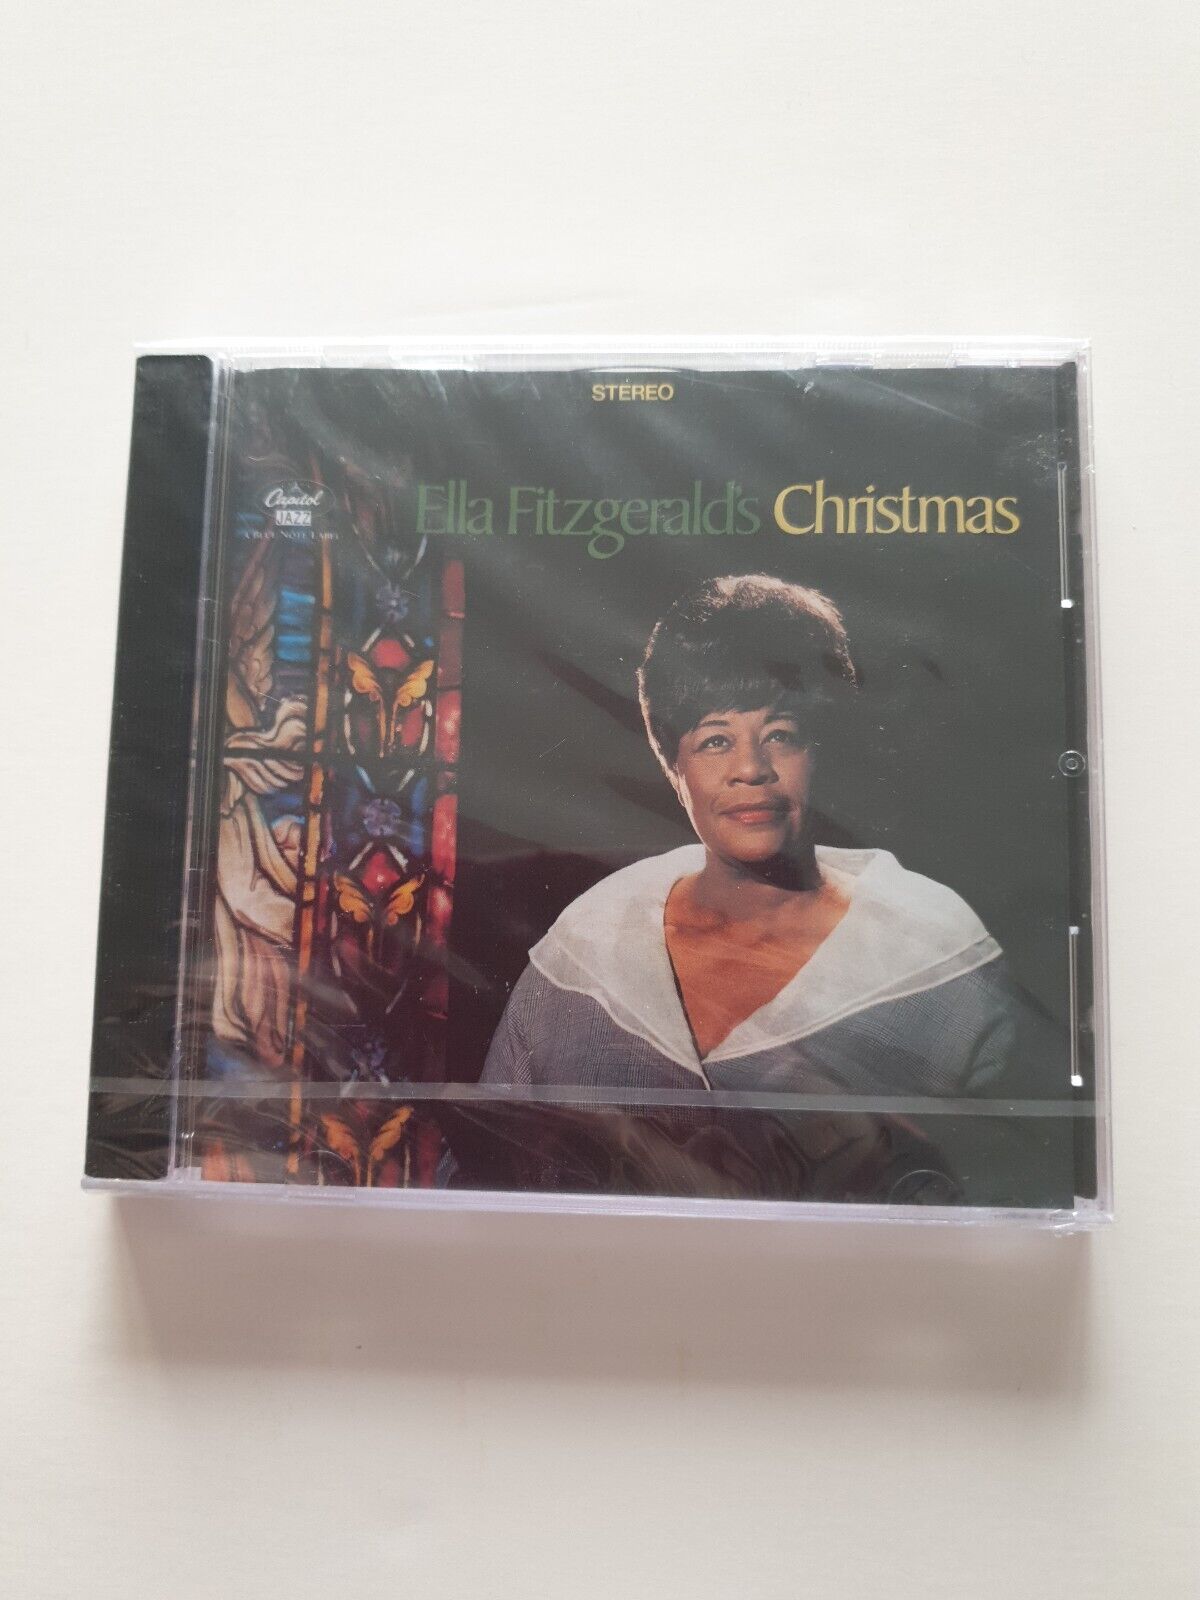 Ella Fitzgerald's Christmas by Ella Fitzgerald - new and sealed CD